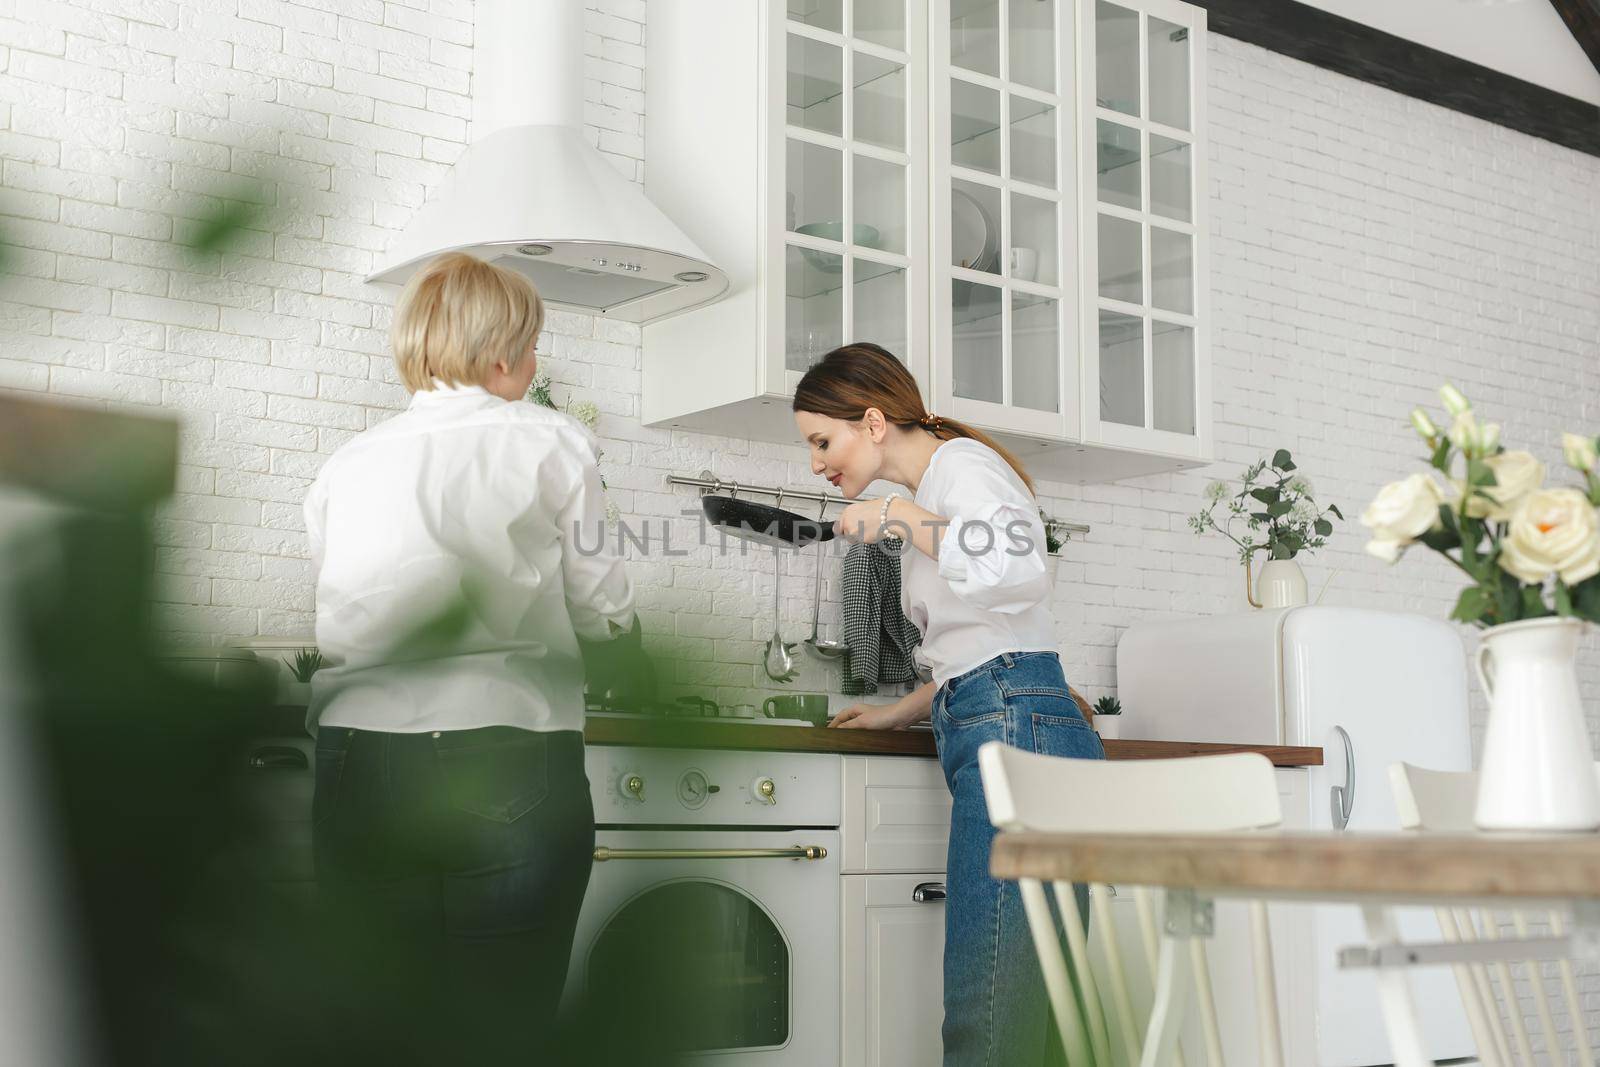 The older mother prepares food in the kitchen, the daughter drinks tea and looks at her mother.